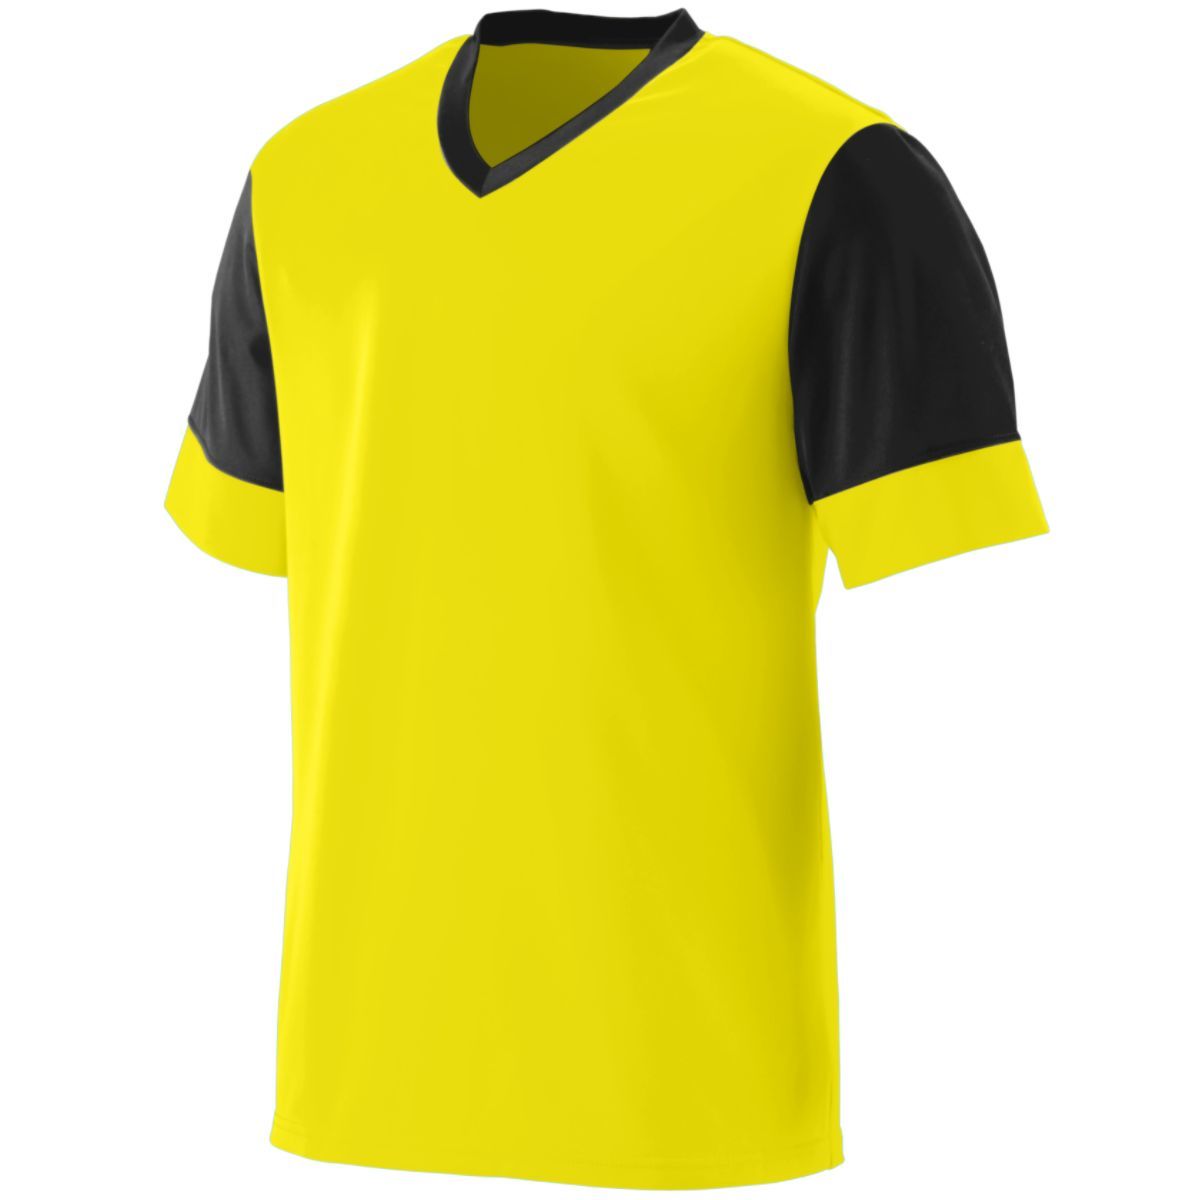 Augusta Sportswear Youth Lightning Jersey in Power Yellow/Black  -Part of the Youth, Youth-Jersey, Augusta-Products, Soccer, Shirts, All-Sports-1 product lines at KanaleyCreations.com